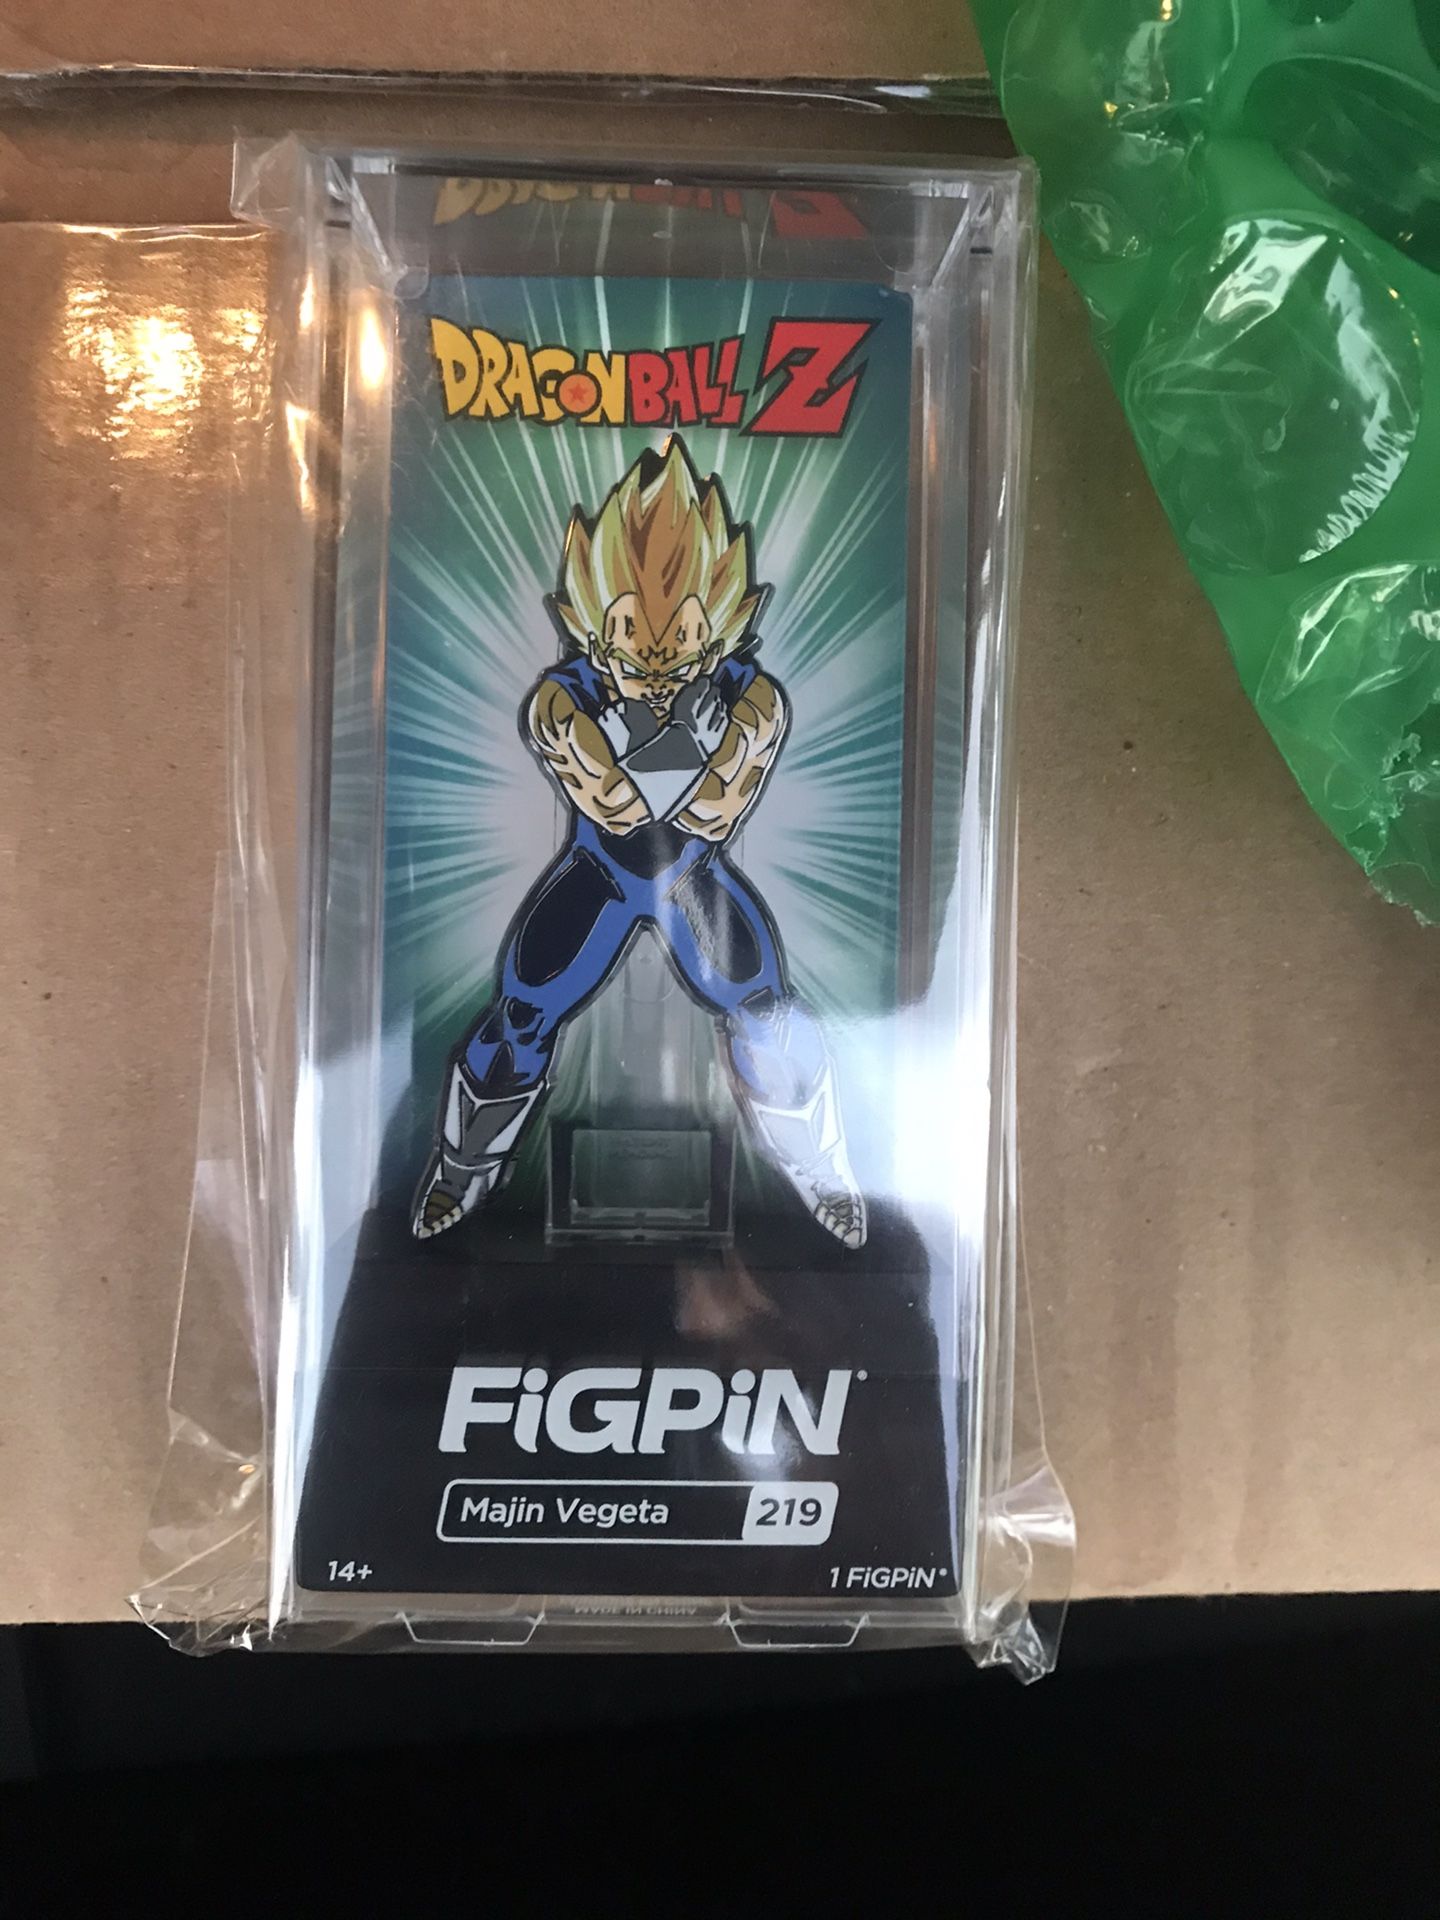 FiGPiN Dragonball Z Majin Vegeta NYCC Exclusive 1 of 3000 Limited